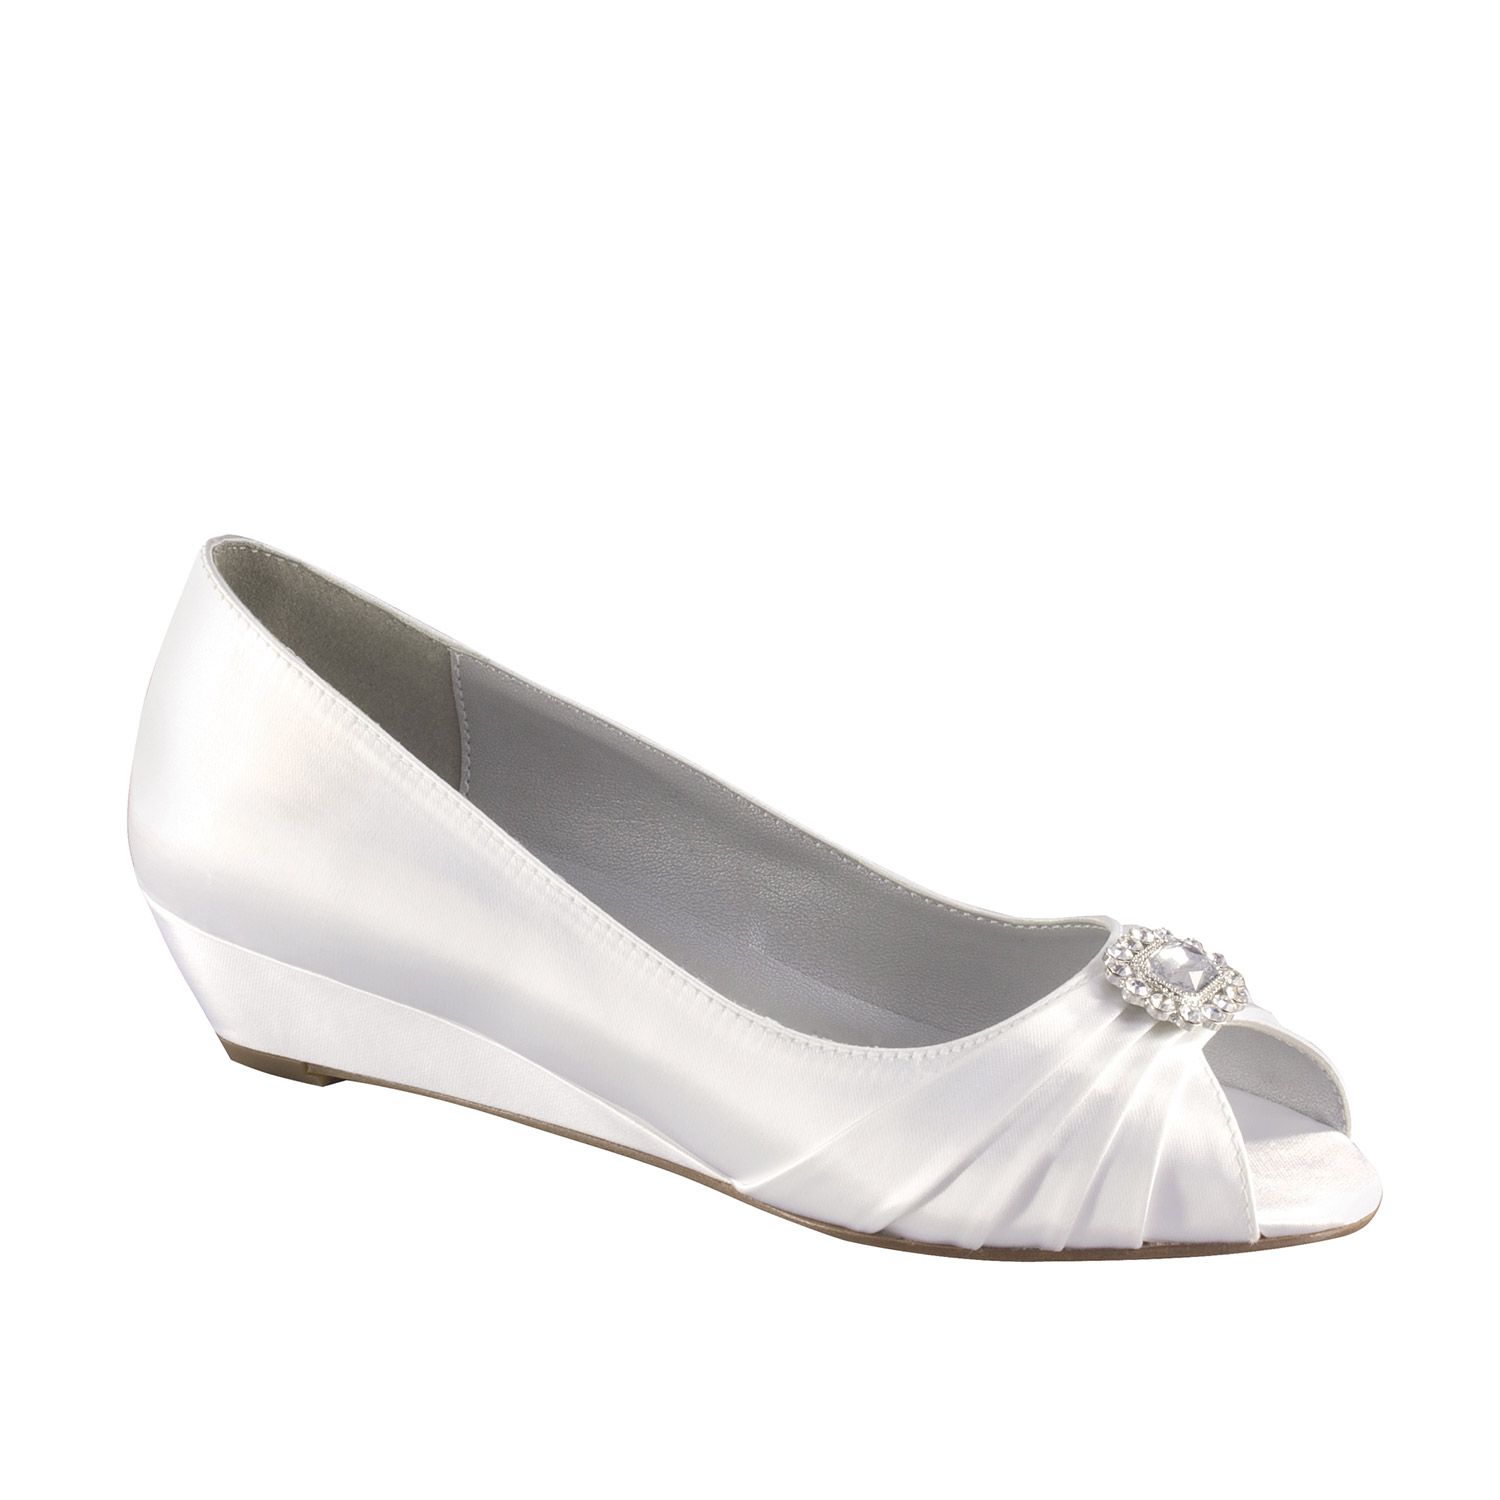 Size 7 Anette Dyeables Wedding shoe